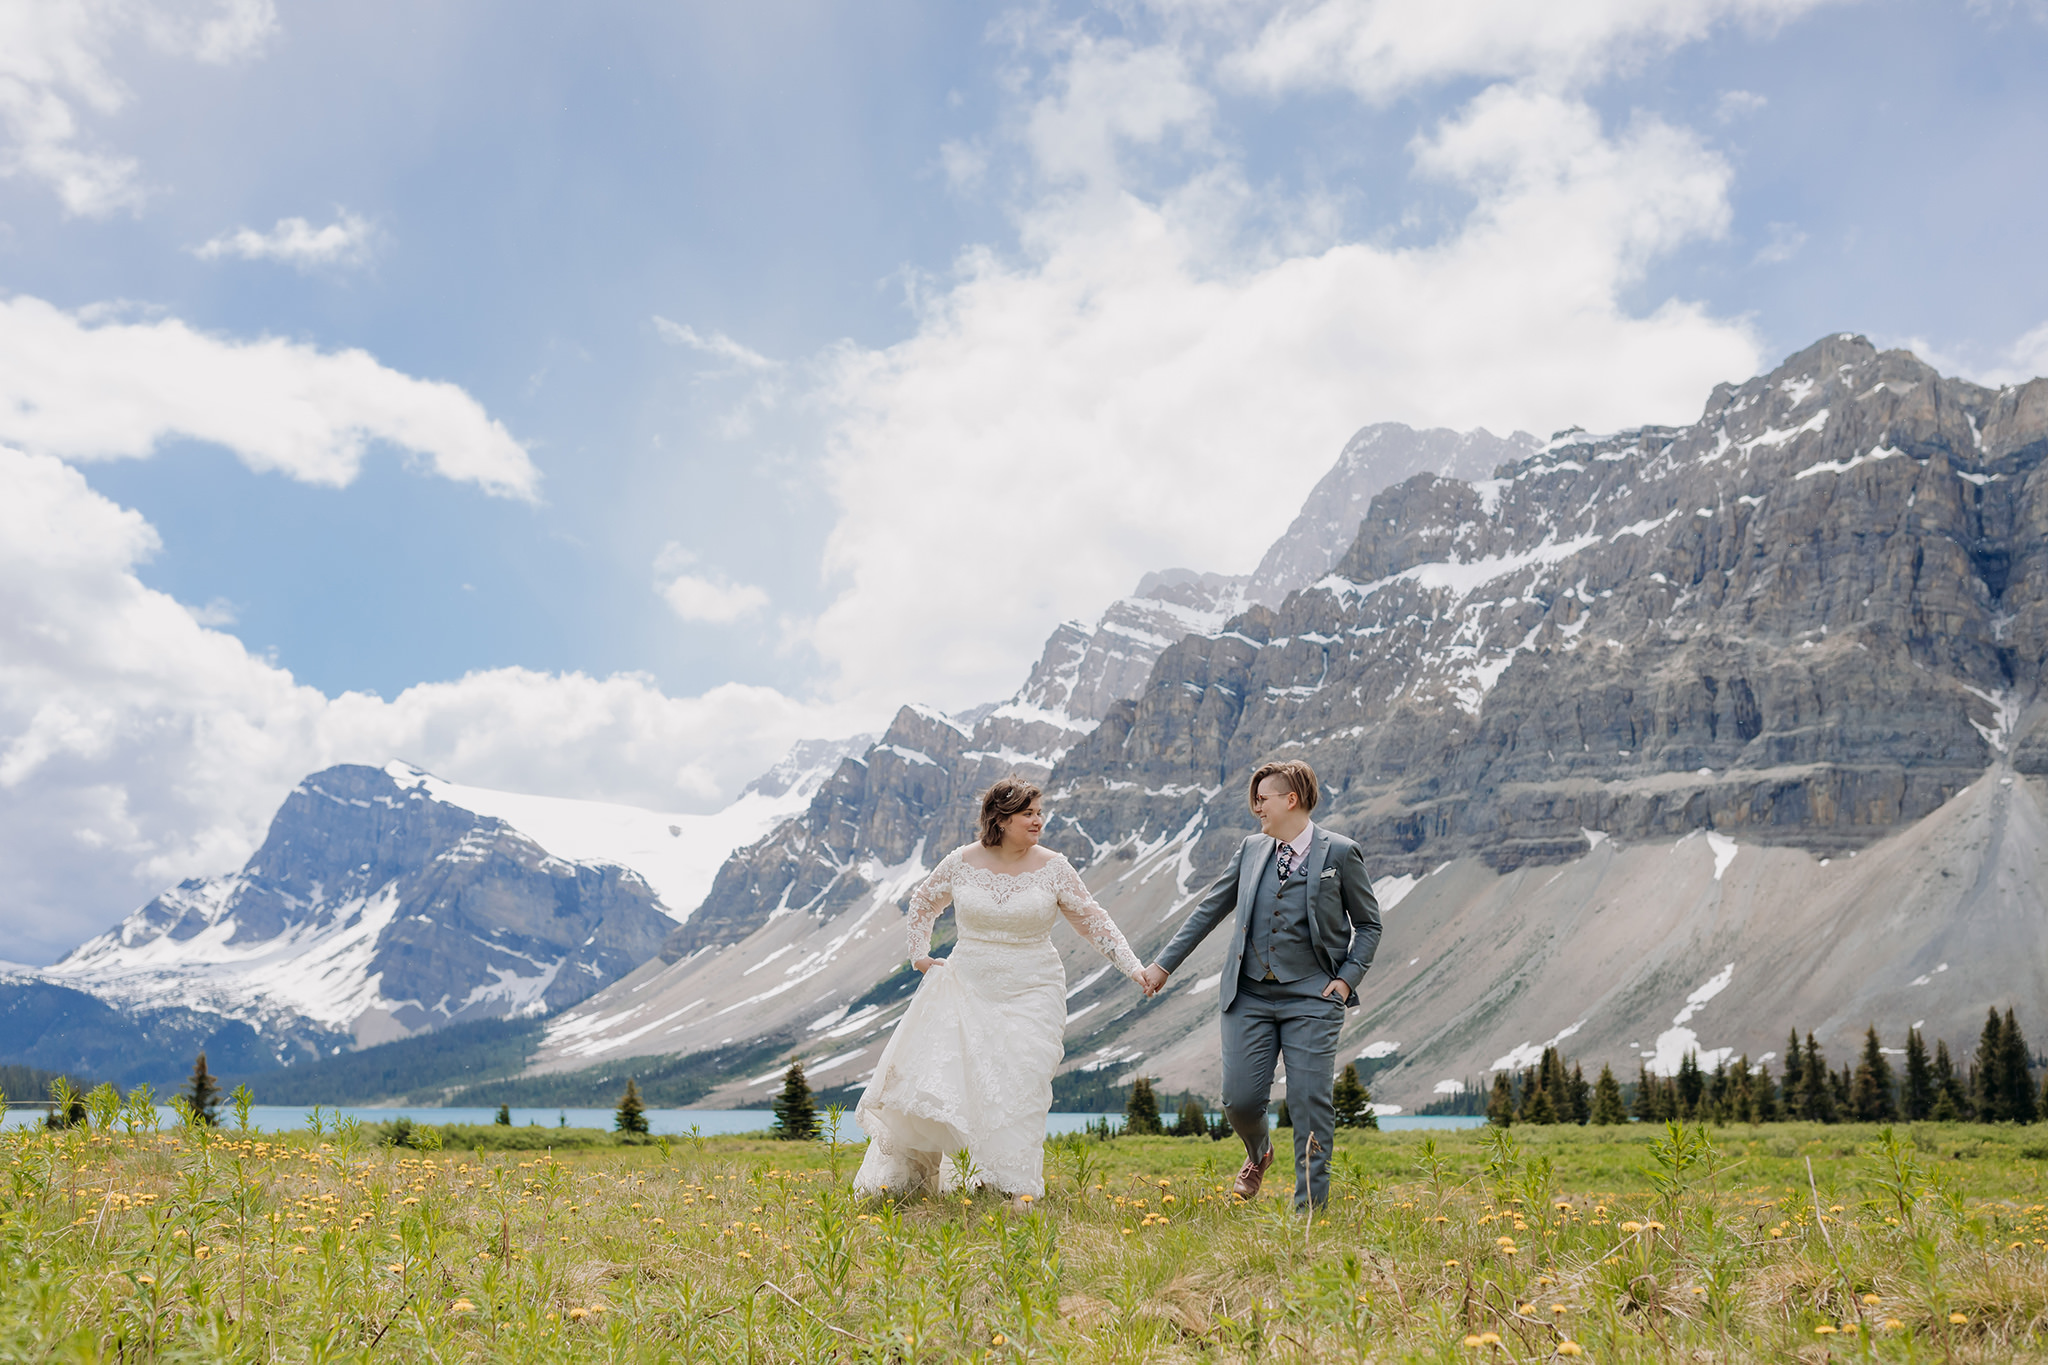 Post-wedding portraits in the meadow at Bow Lake. same-sex wedding. Mountain Wedding portraits photographed by ENV Photography. Gay friendly. LGBTQ friendly wedding & elopement photographer.